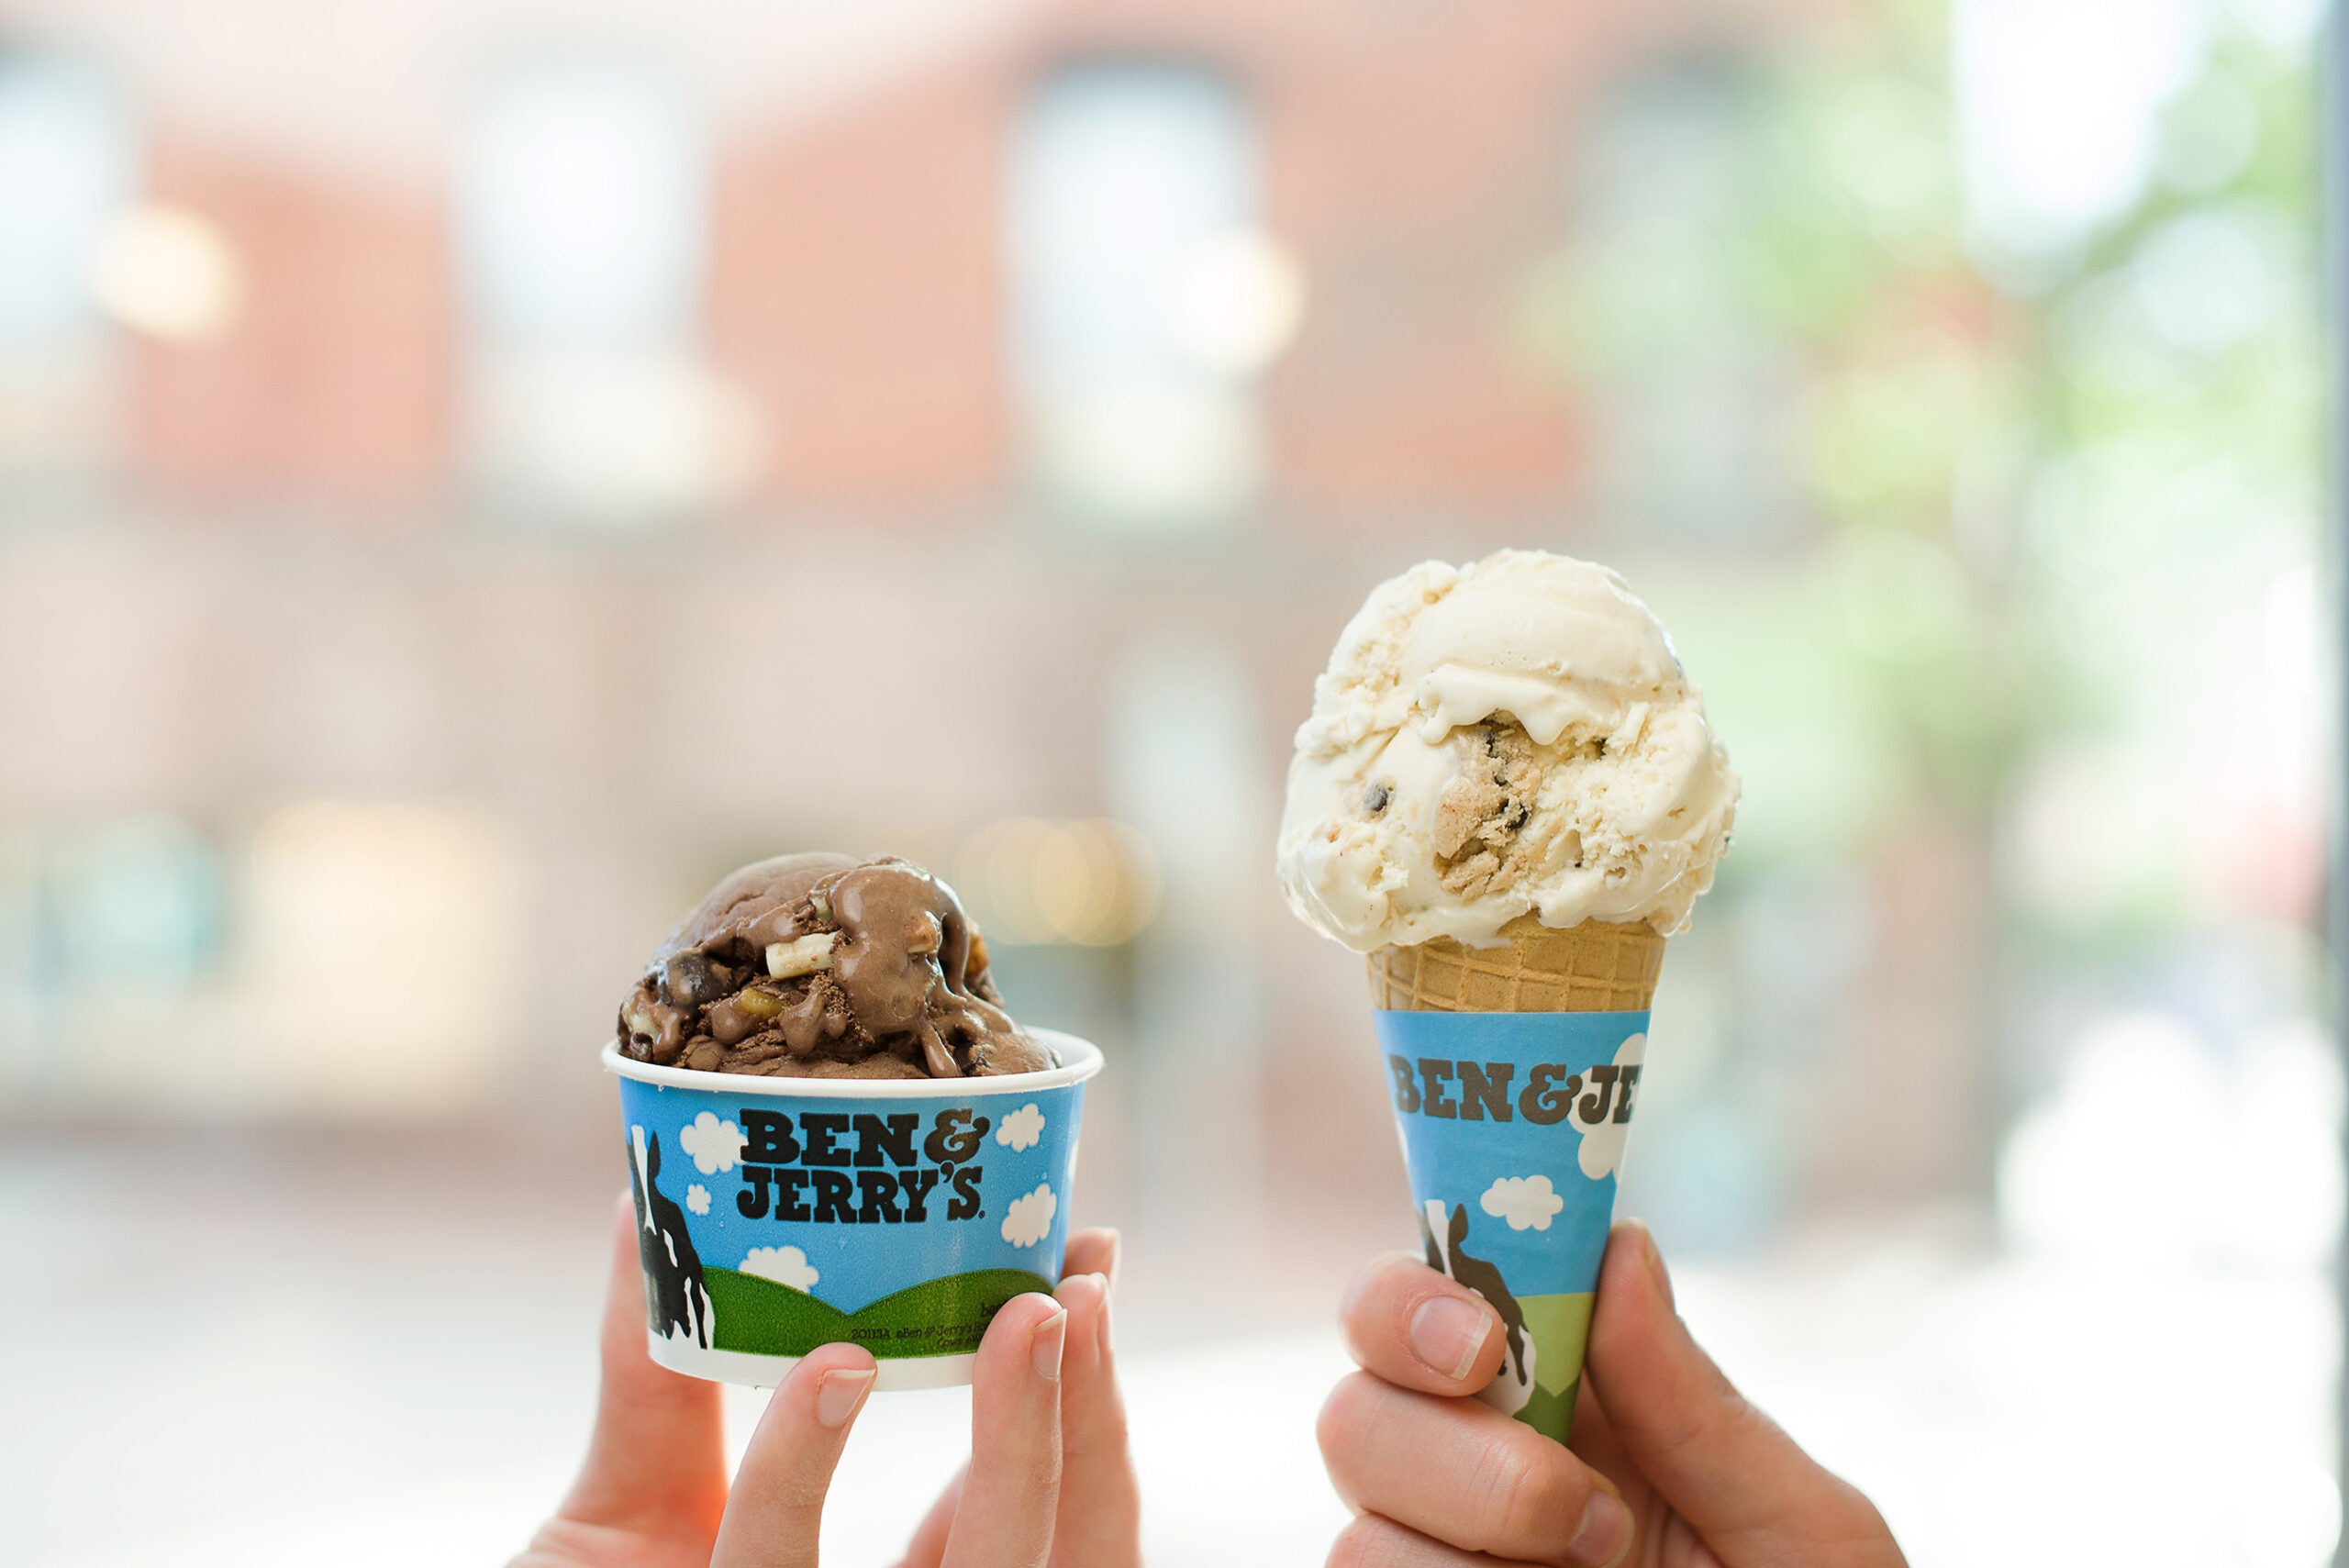 Ben & Jerry’s Free Cone Day is just around the corner